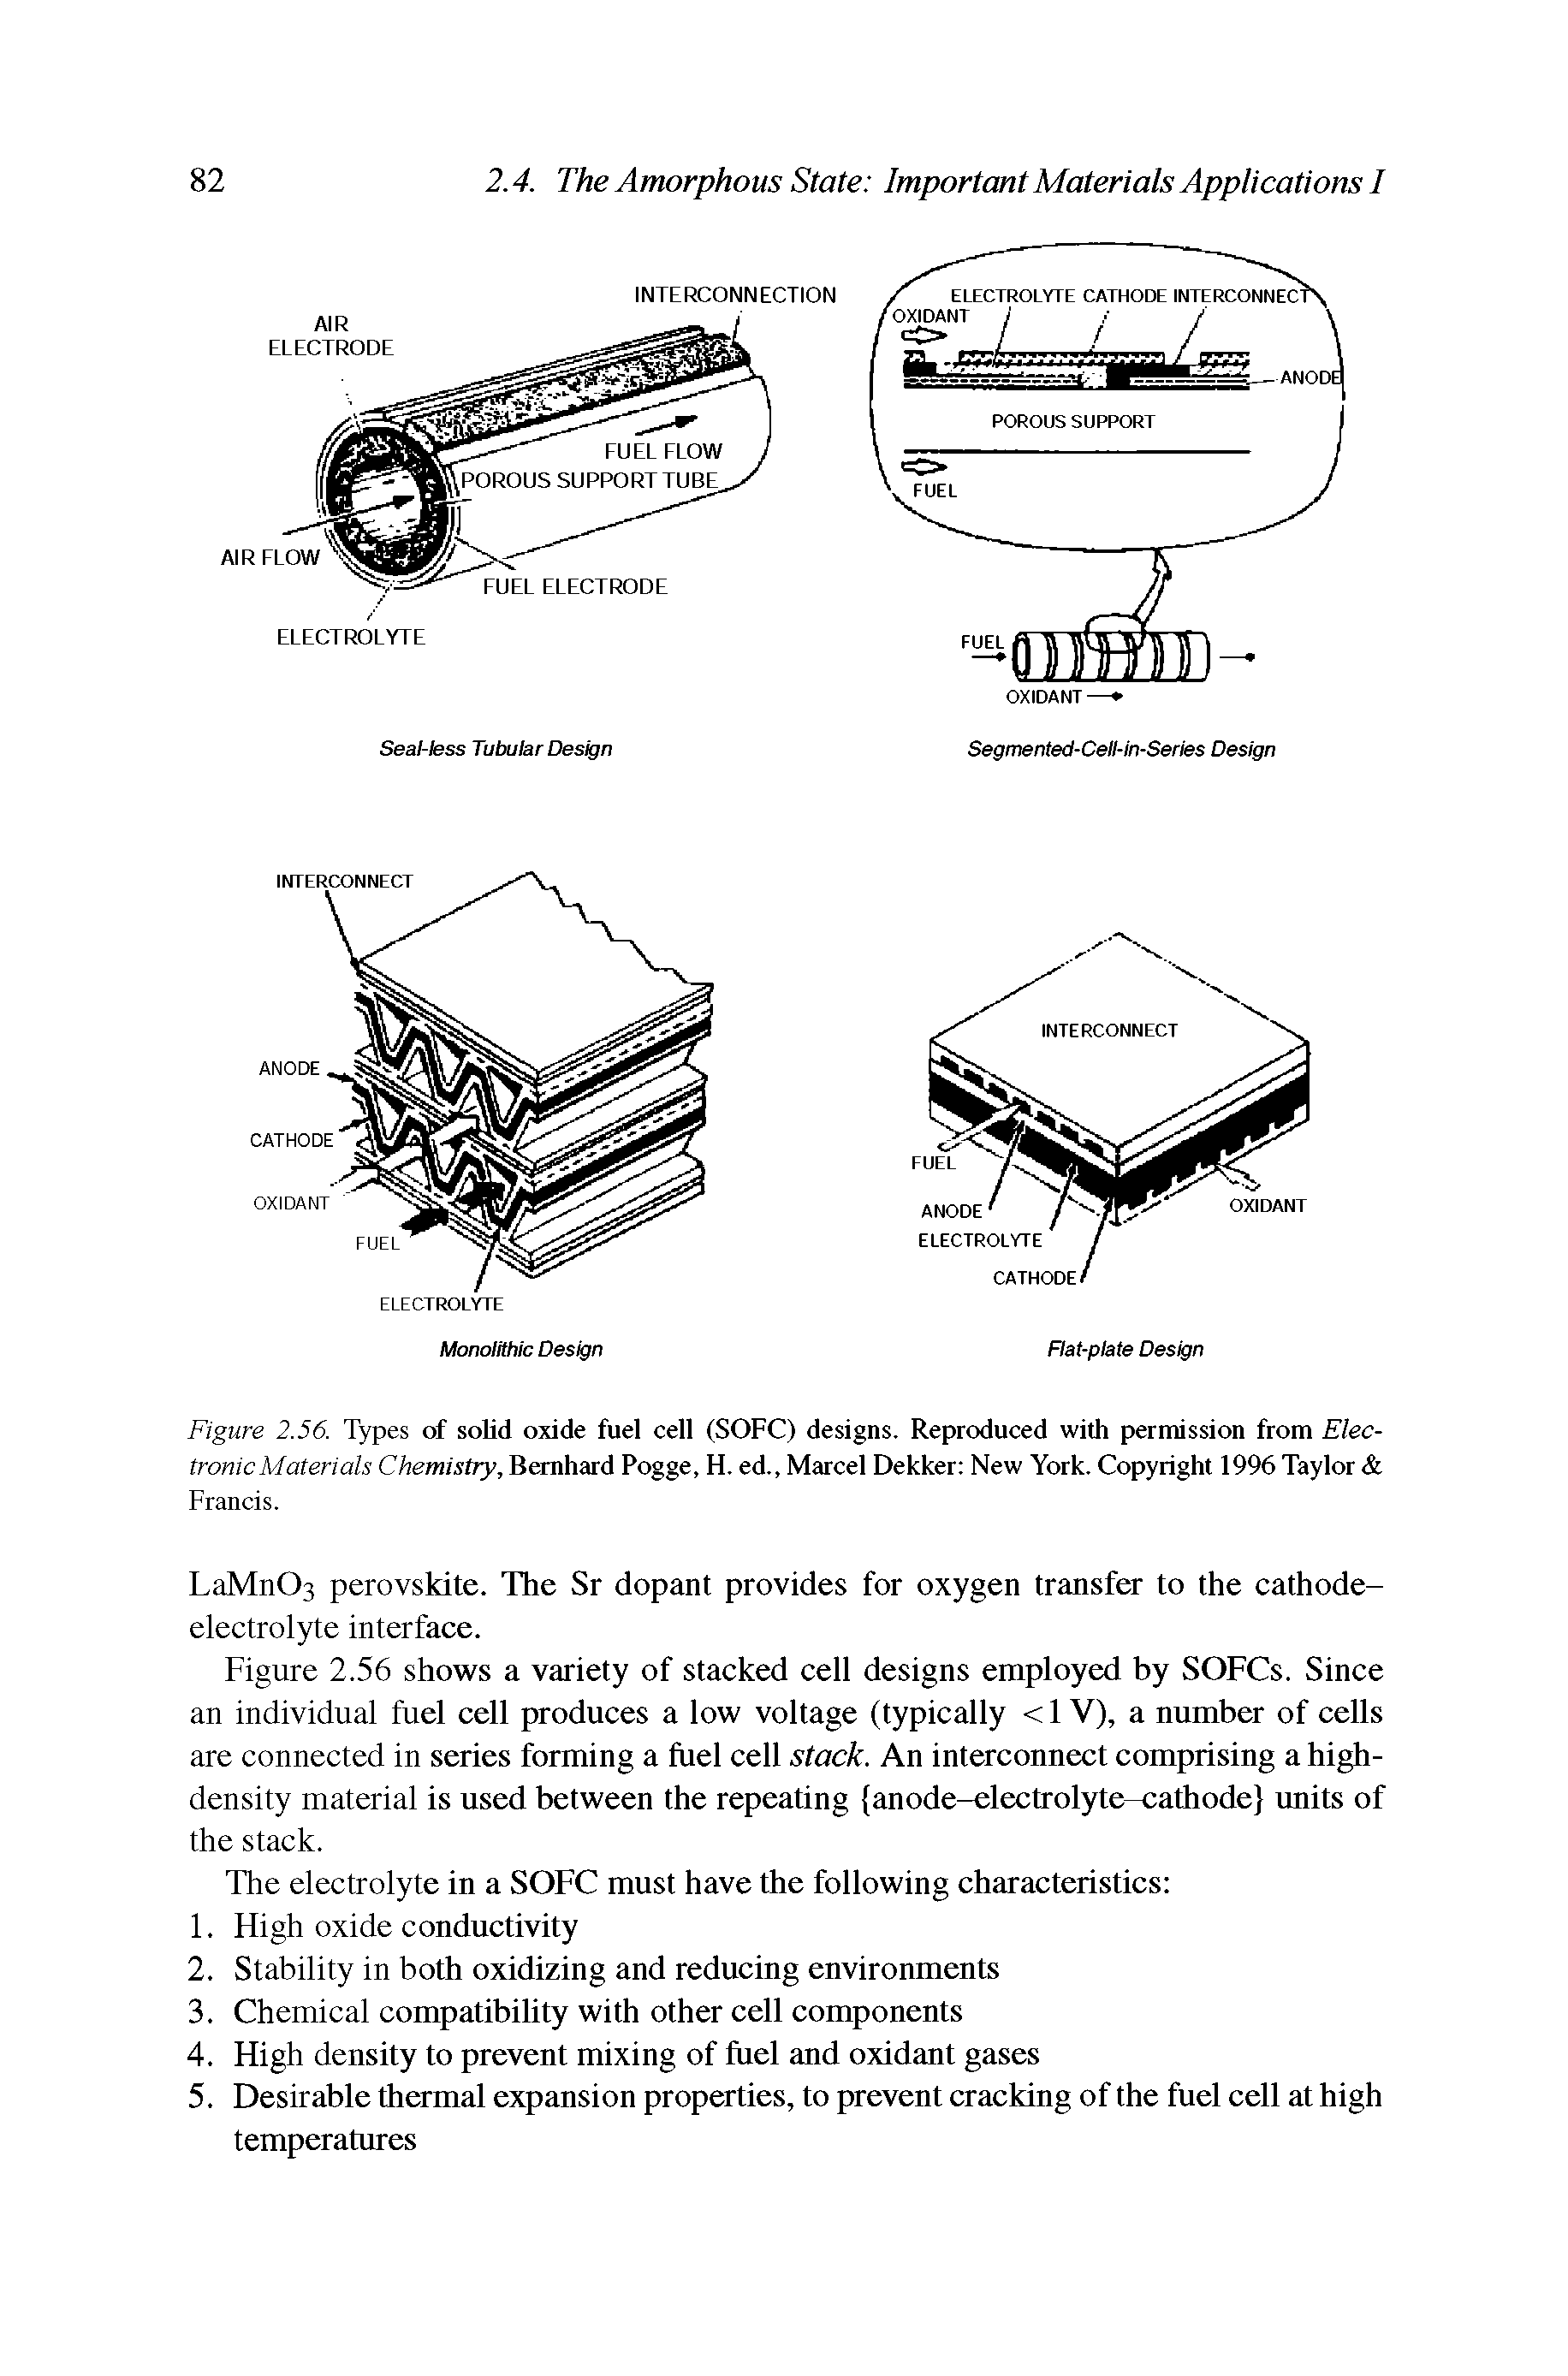 Figure 2.56. Types of solid oxide fuel cell (SOFC) designs. Reproduced with periuission from Electronic Materials Chemistry, Bernhard Pogge, H. ed., Marcel Dekker New York. Copyright 1996 Taylor ...